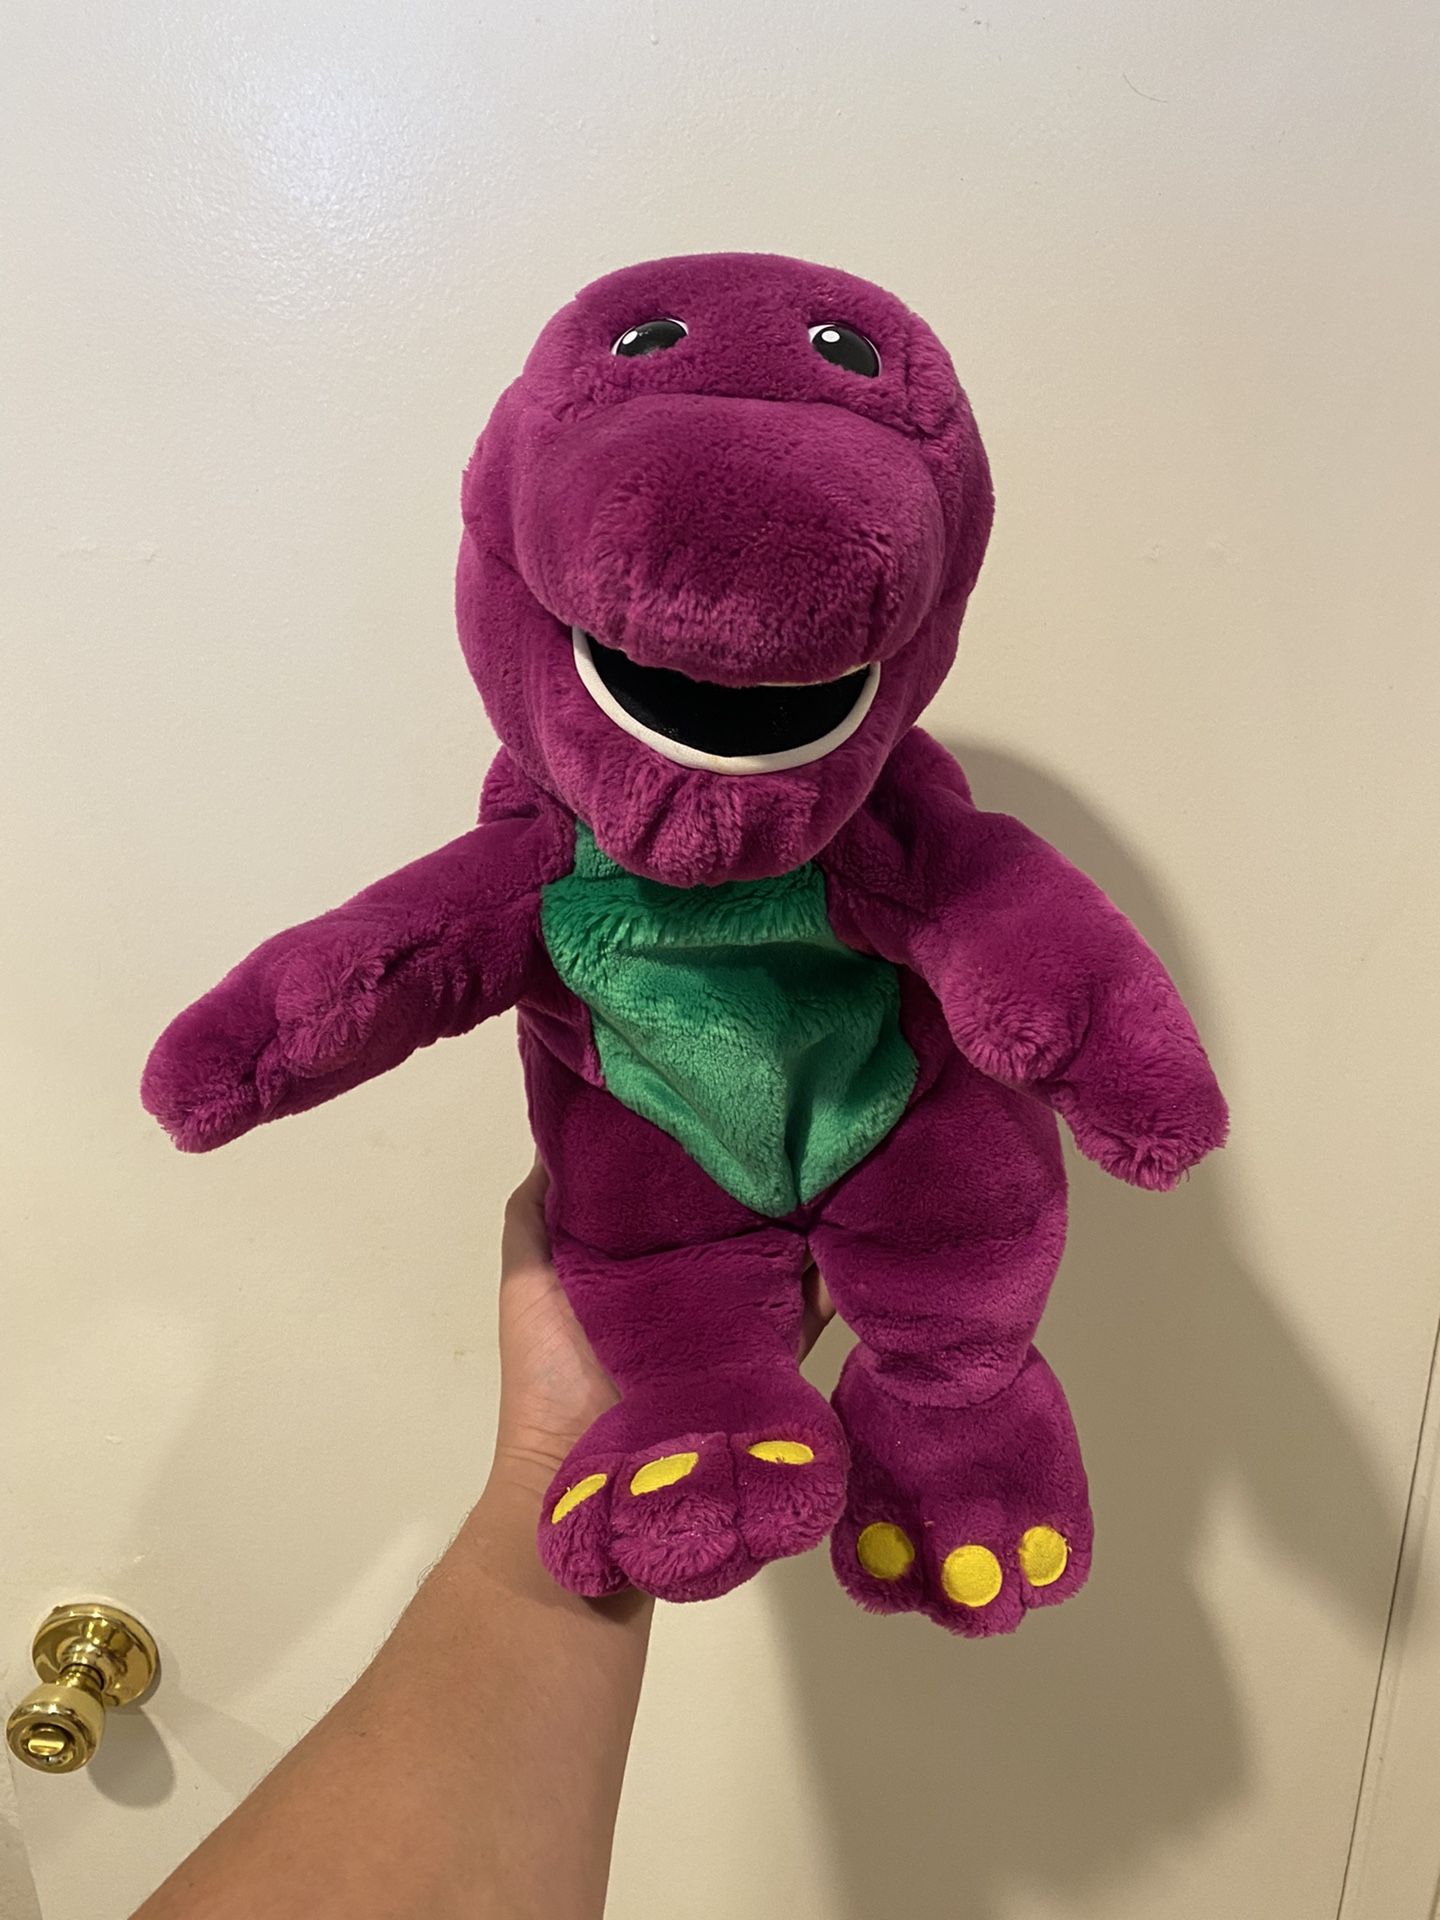 BARNEY Plush Toy - Talking & Singing Games - Vintage 1997 ActiMates Microsoft corporation Tested Works Great